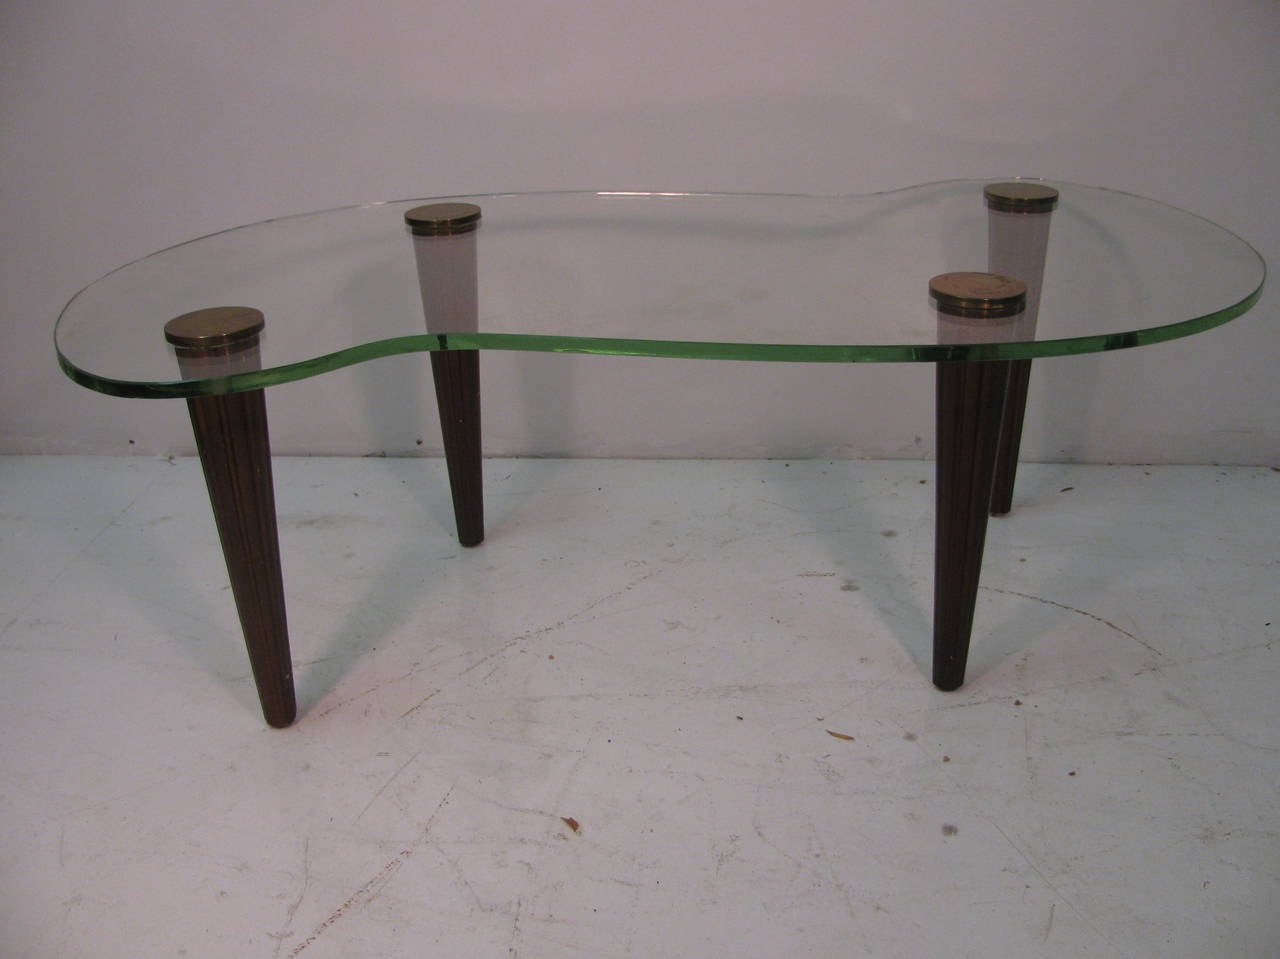 Beautiful glass top cocktail table in the style of Gilbert Rohde. Tapered, fluted legs with brass caps locking them to the glass top.